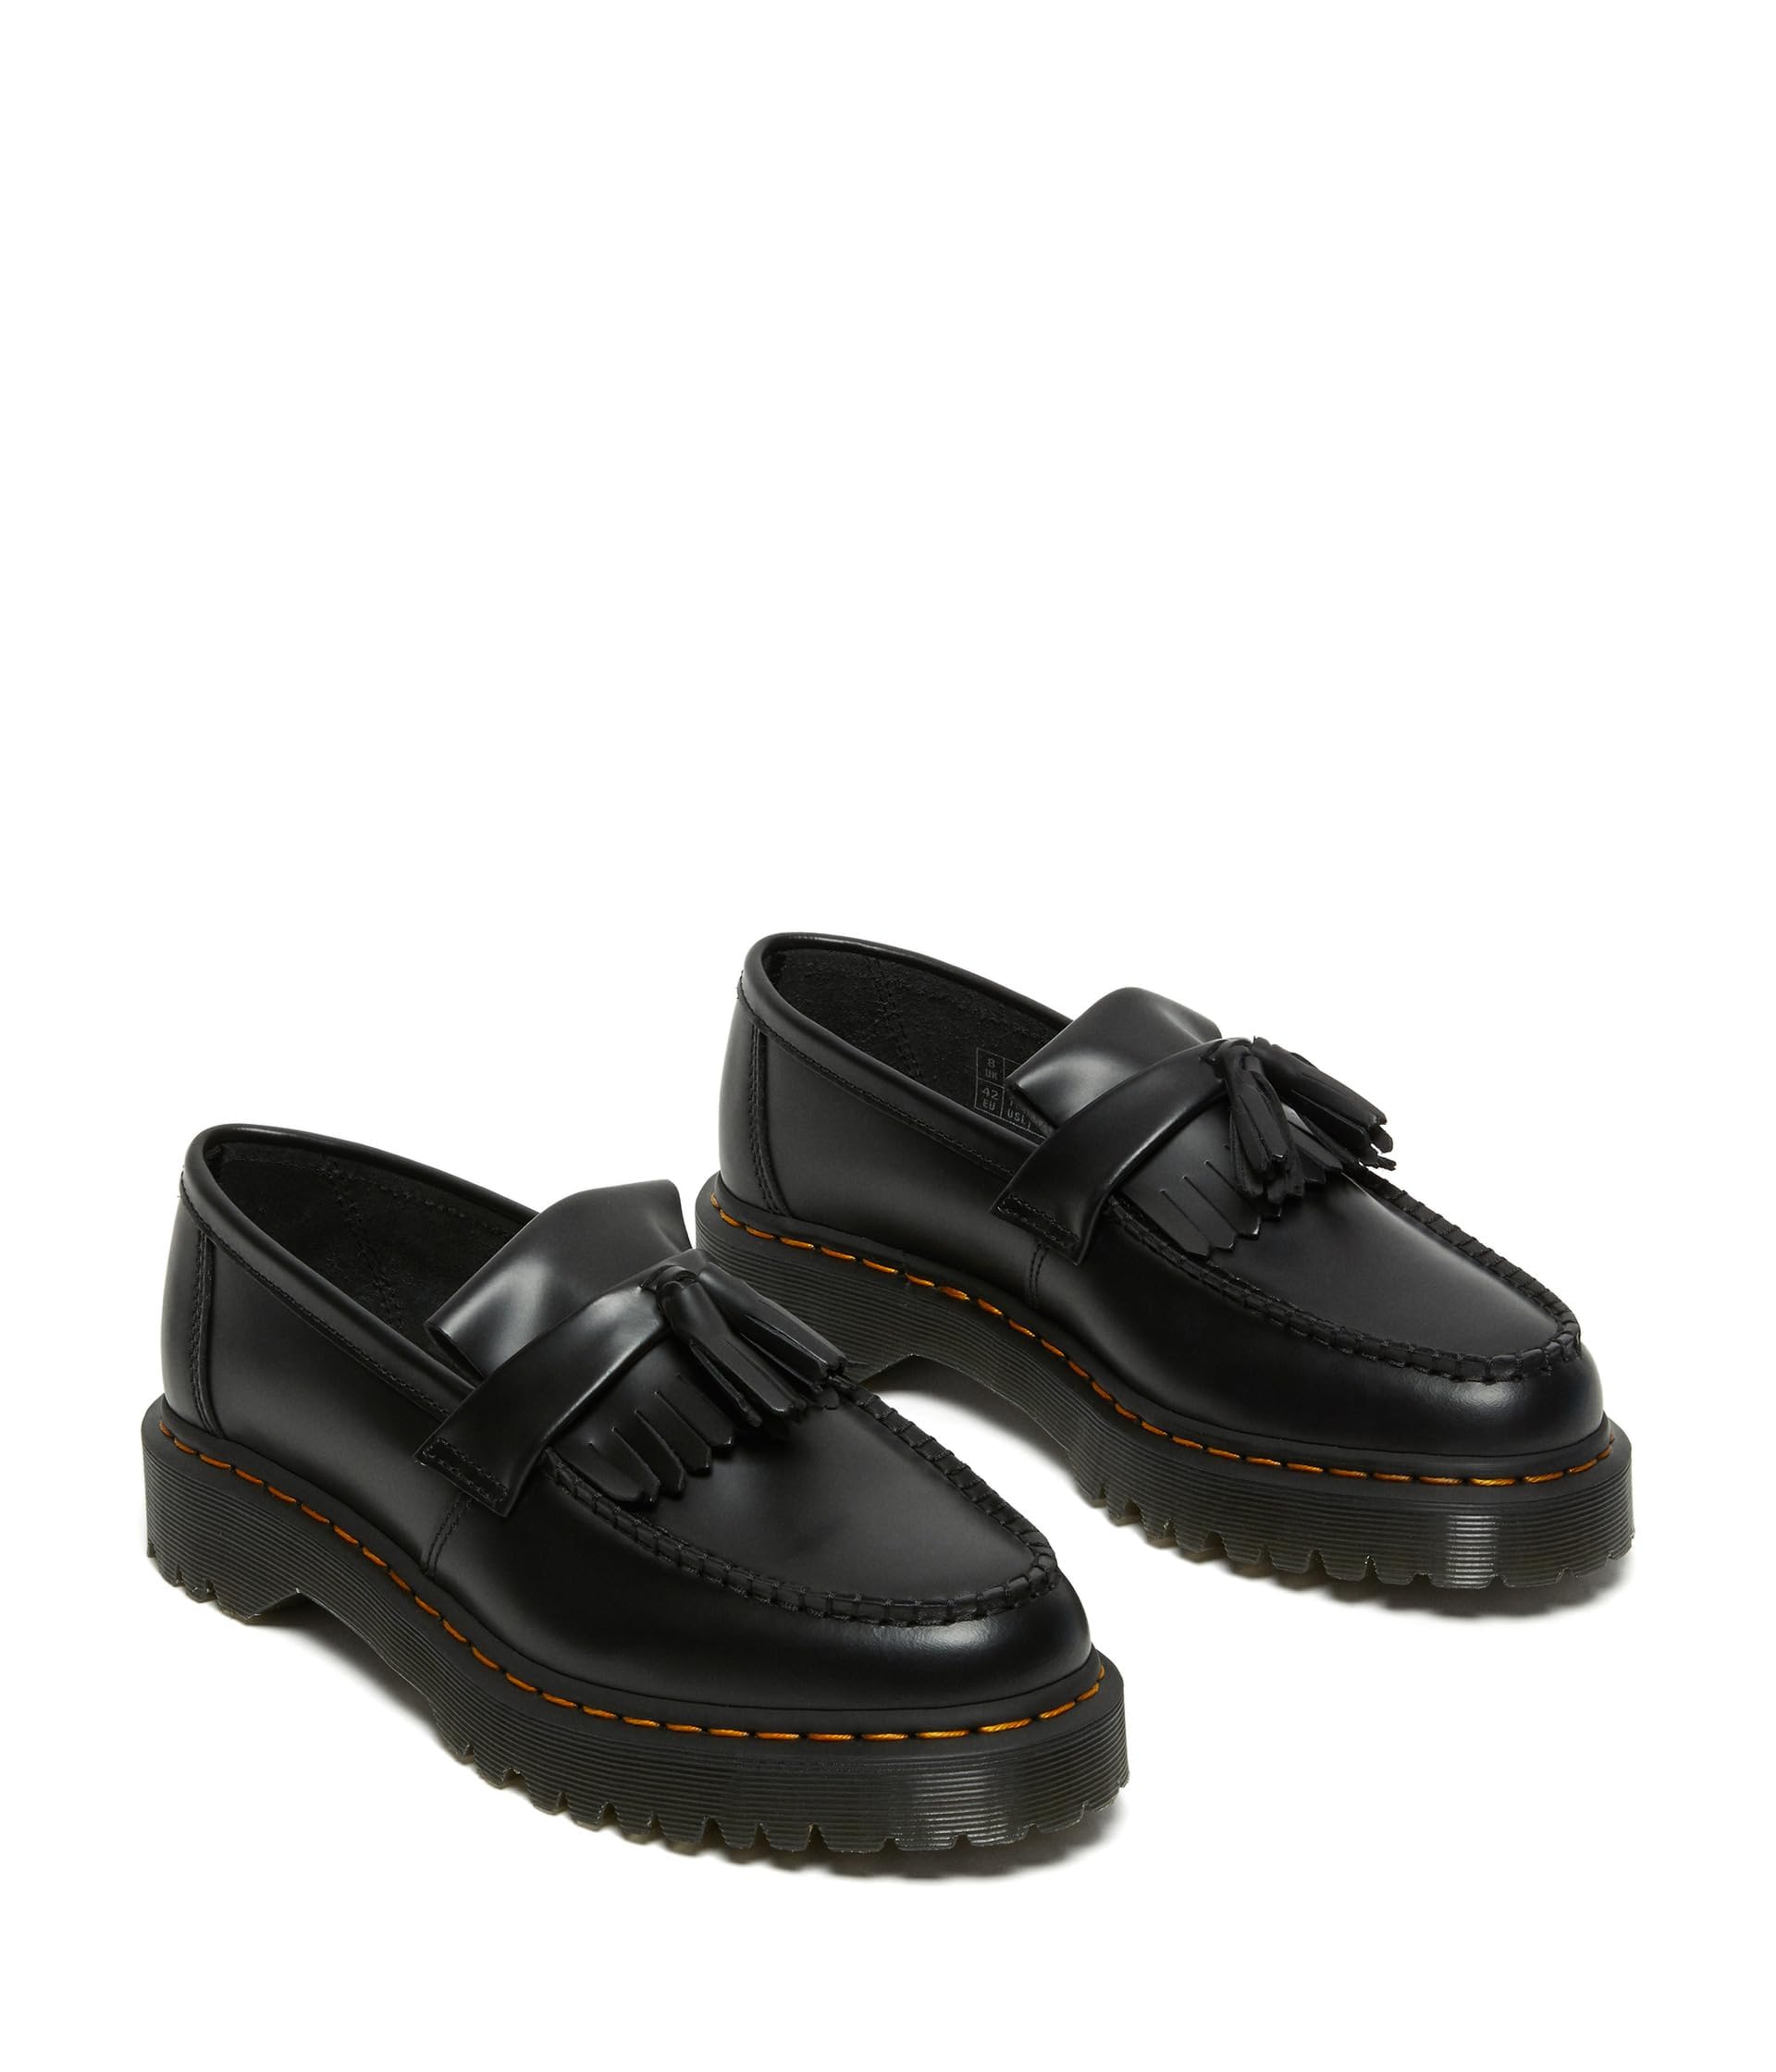 Dr. Martens Unisex-Adult Adrian Bex Smooth Leather Tassel Loafers